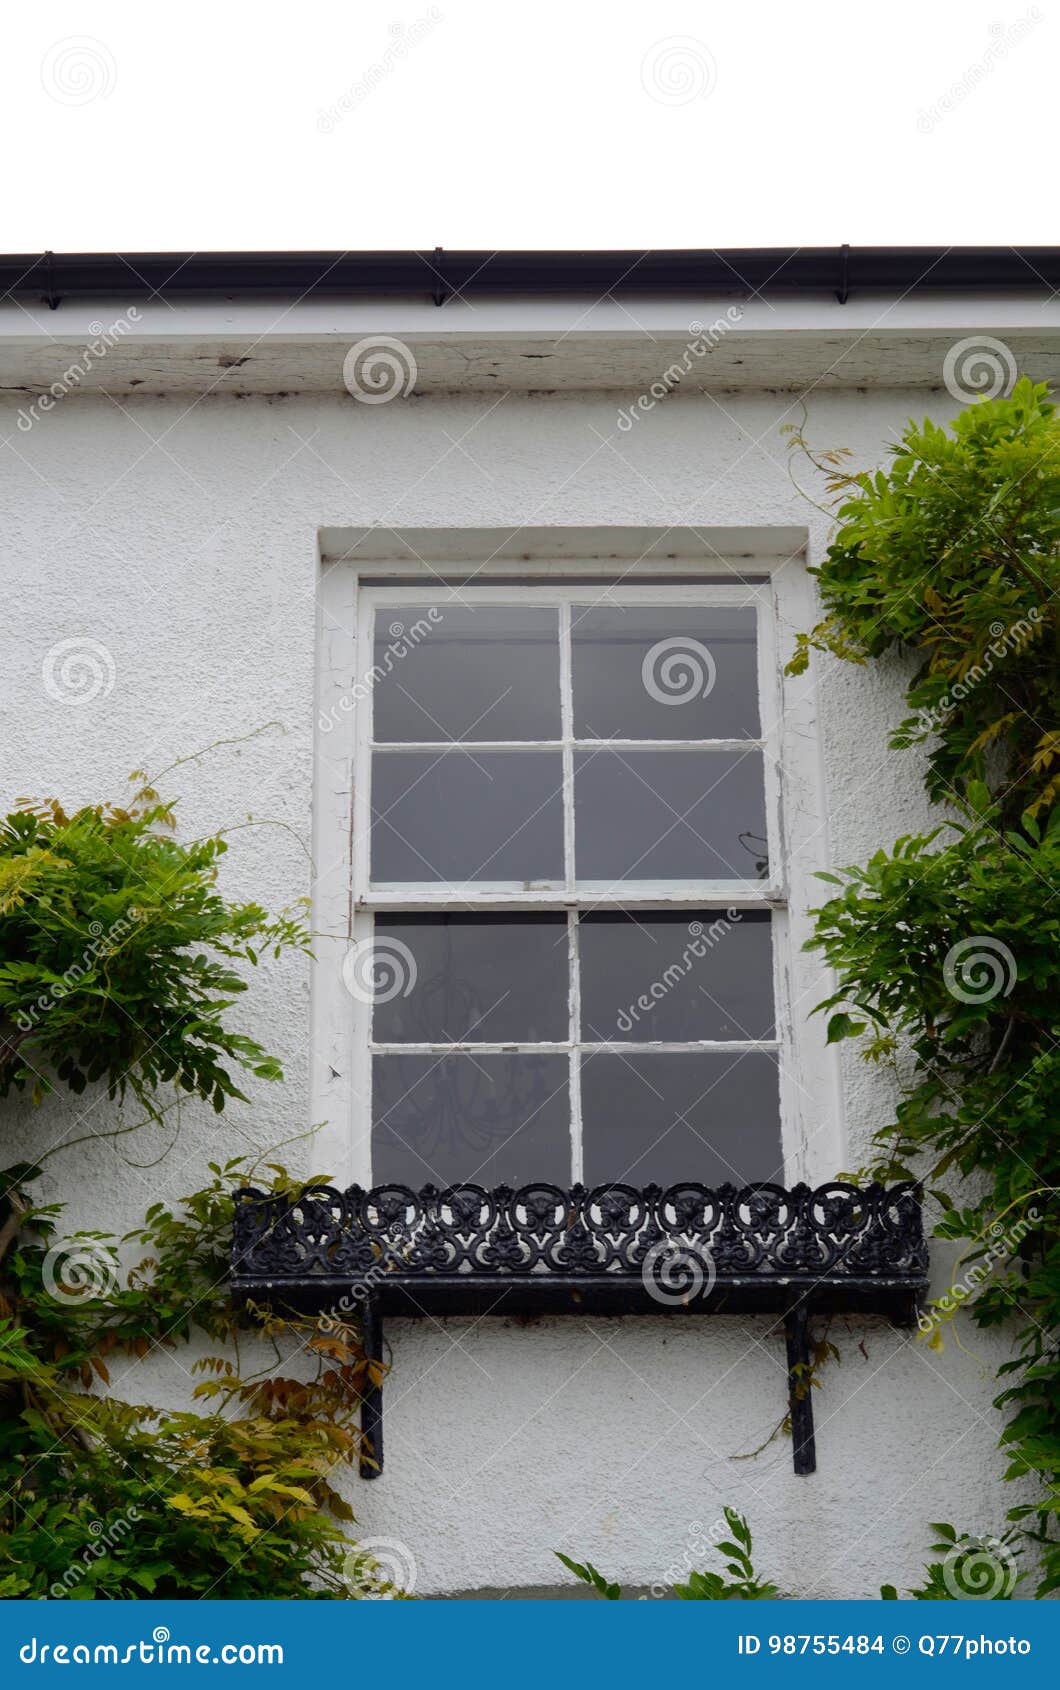 Unusual And Interesting Shape Of The Window, Interesting Element Stock .